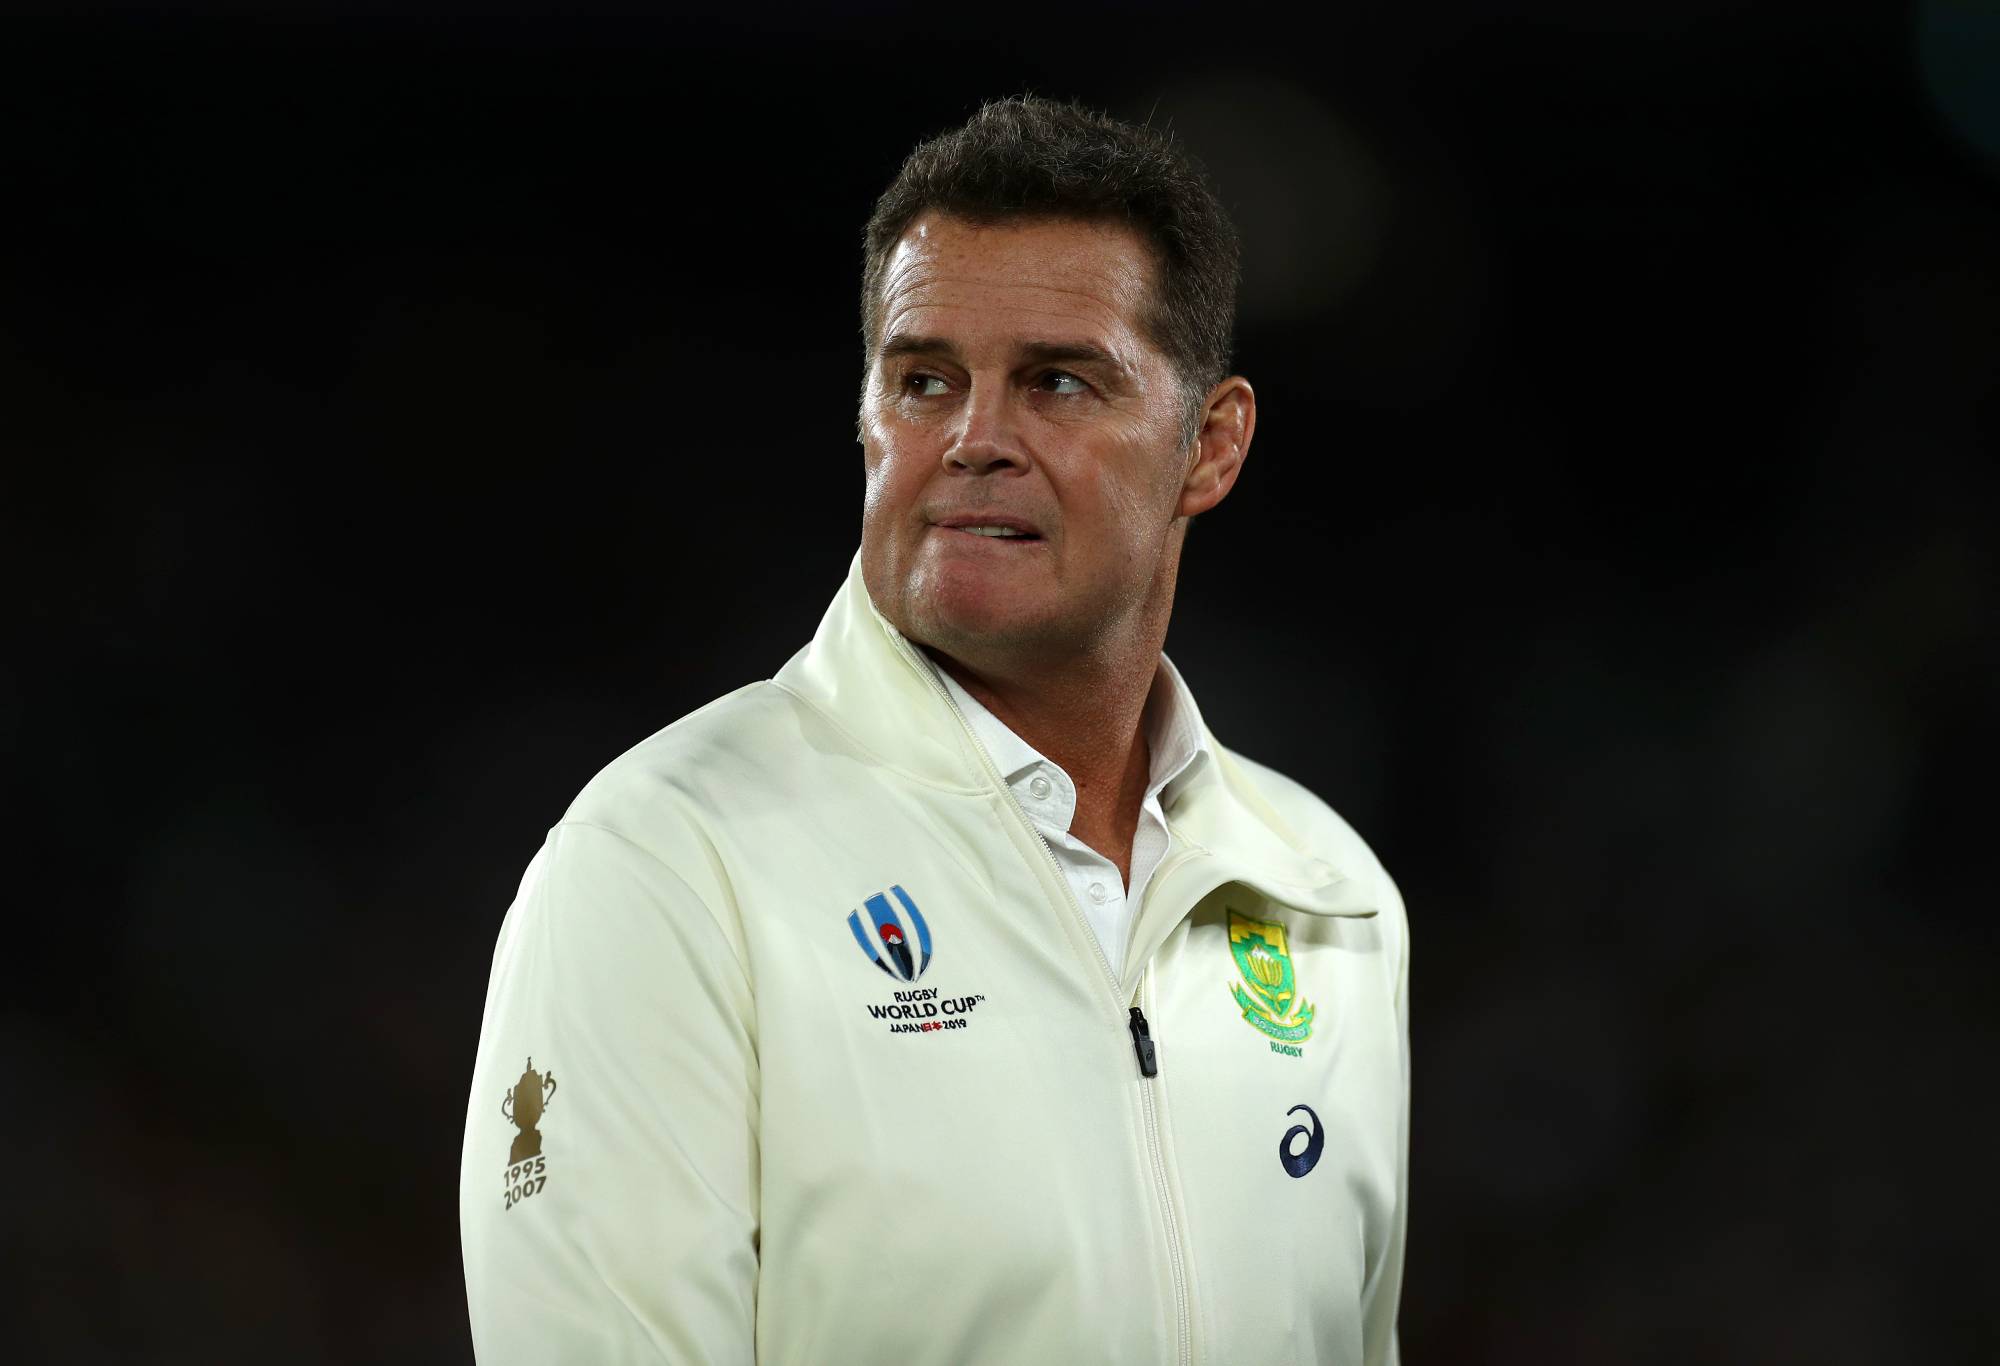 YOKOHAMA, JAPAN - NOVEMBER 02: South Africa head coach Rassie Erasmus looks on ahead of the Rugby World Cup 2019 Final between England and South Africa at International Stadium Yokohama on November 02 2019 in Yokohama, Kanagawa, Japan.  (Photo by Clive Rose - World Rugby/World Rugby via Getty Images)